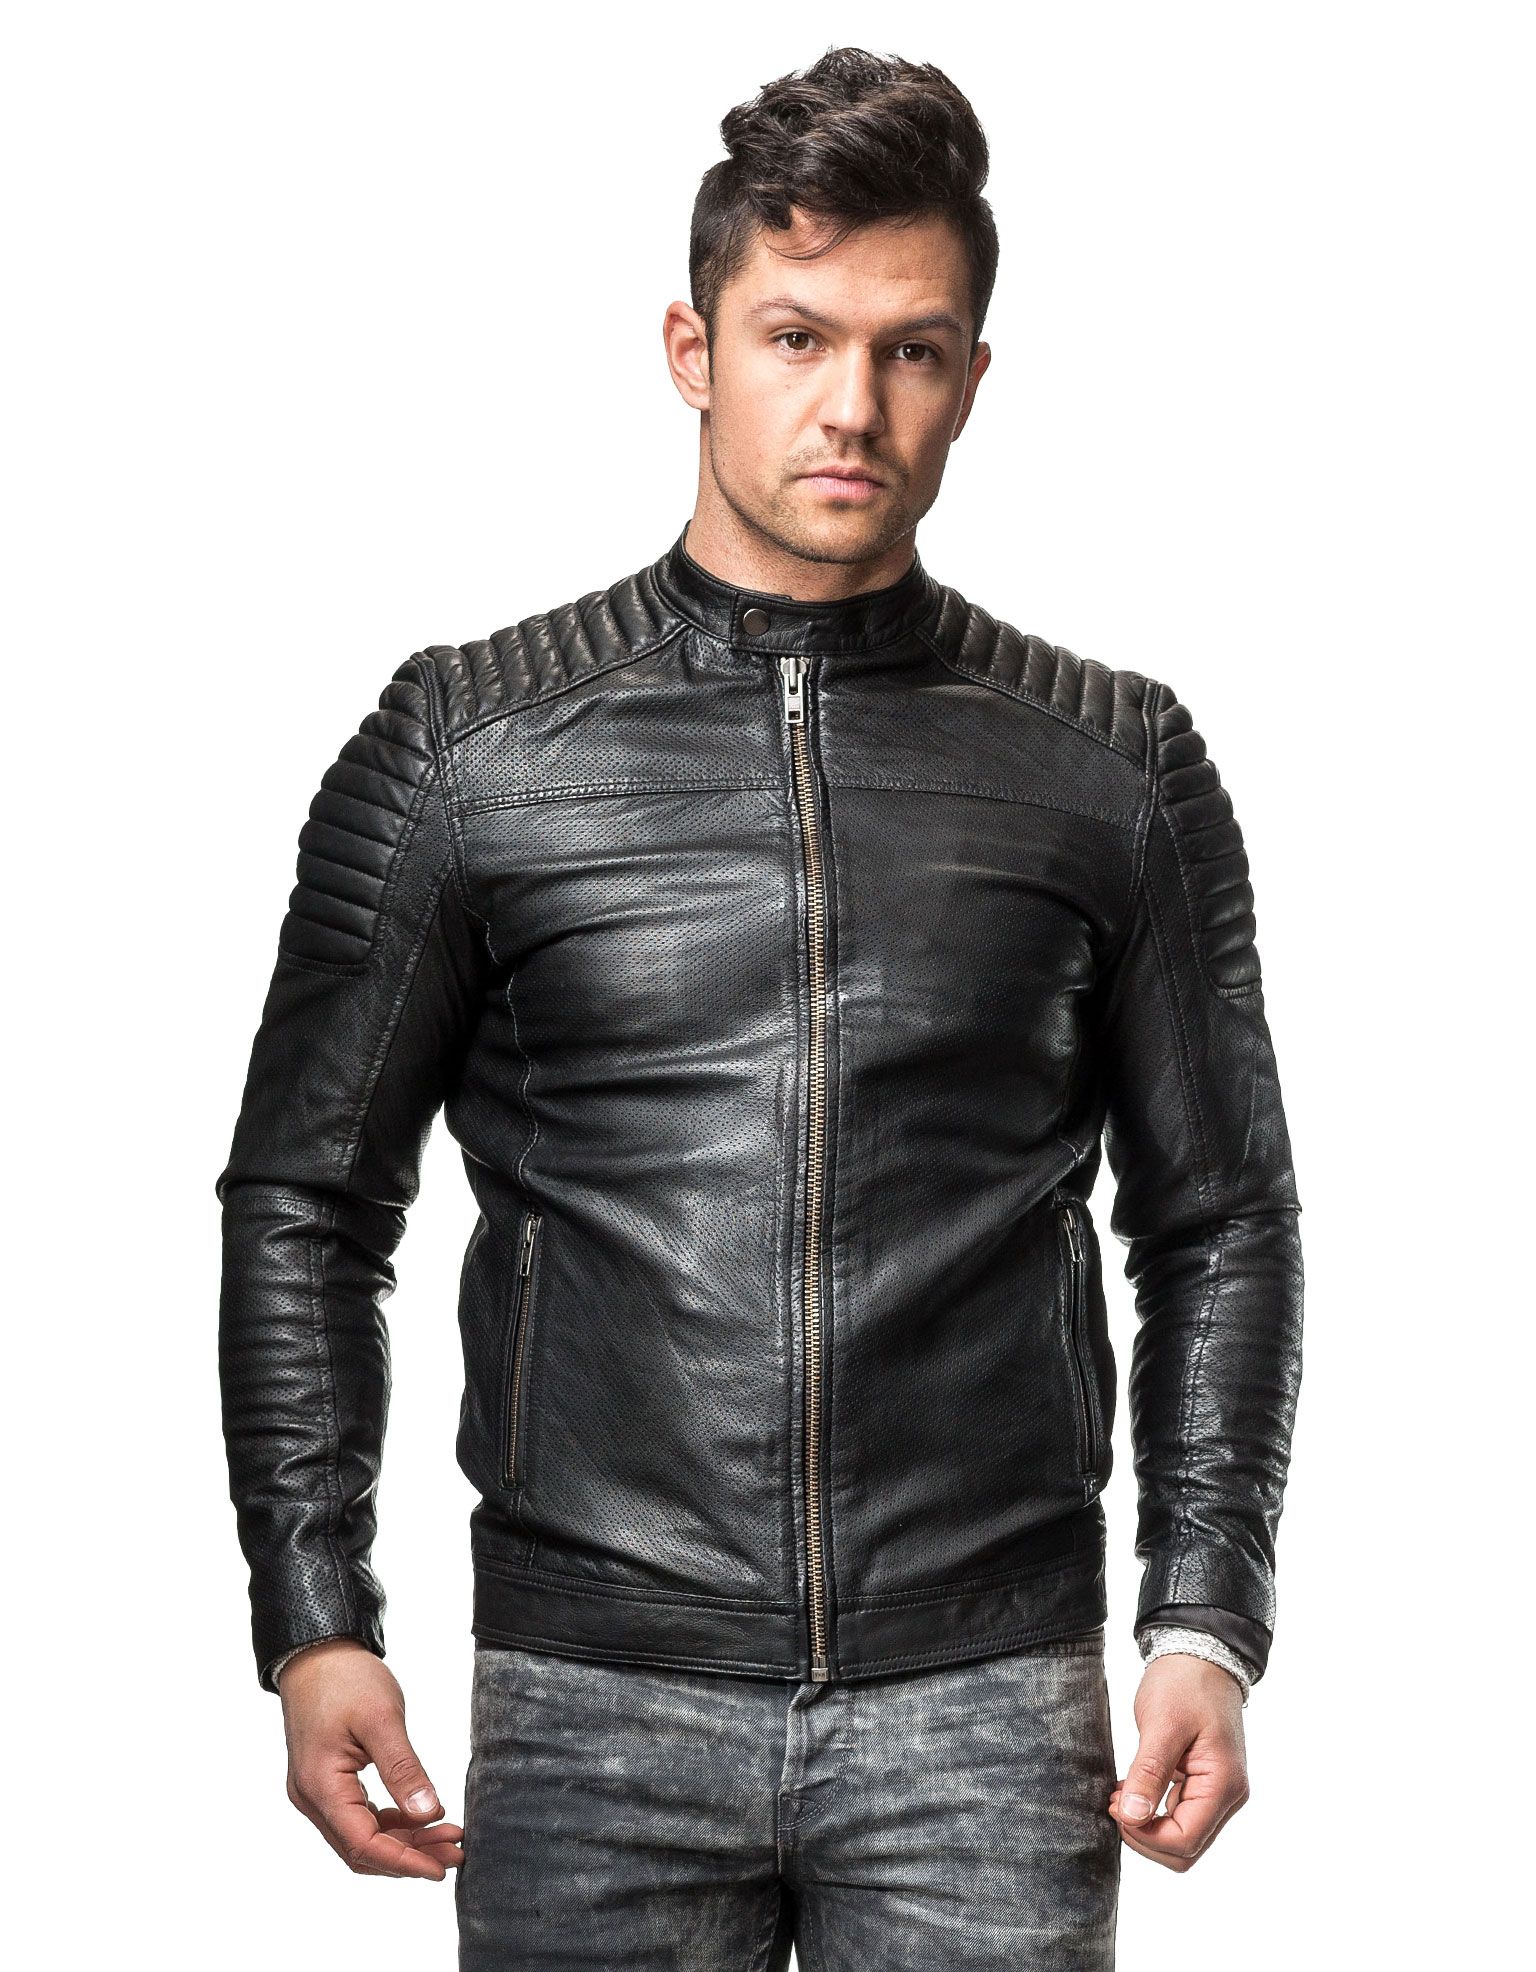 Valley Leather Selected Homme - 0978 - Trashbin - Jerone.com